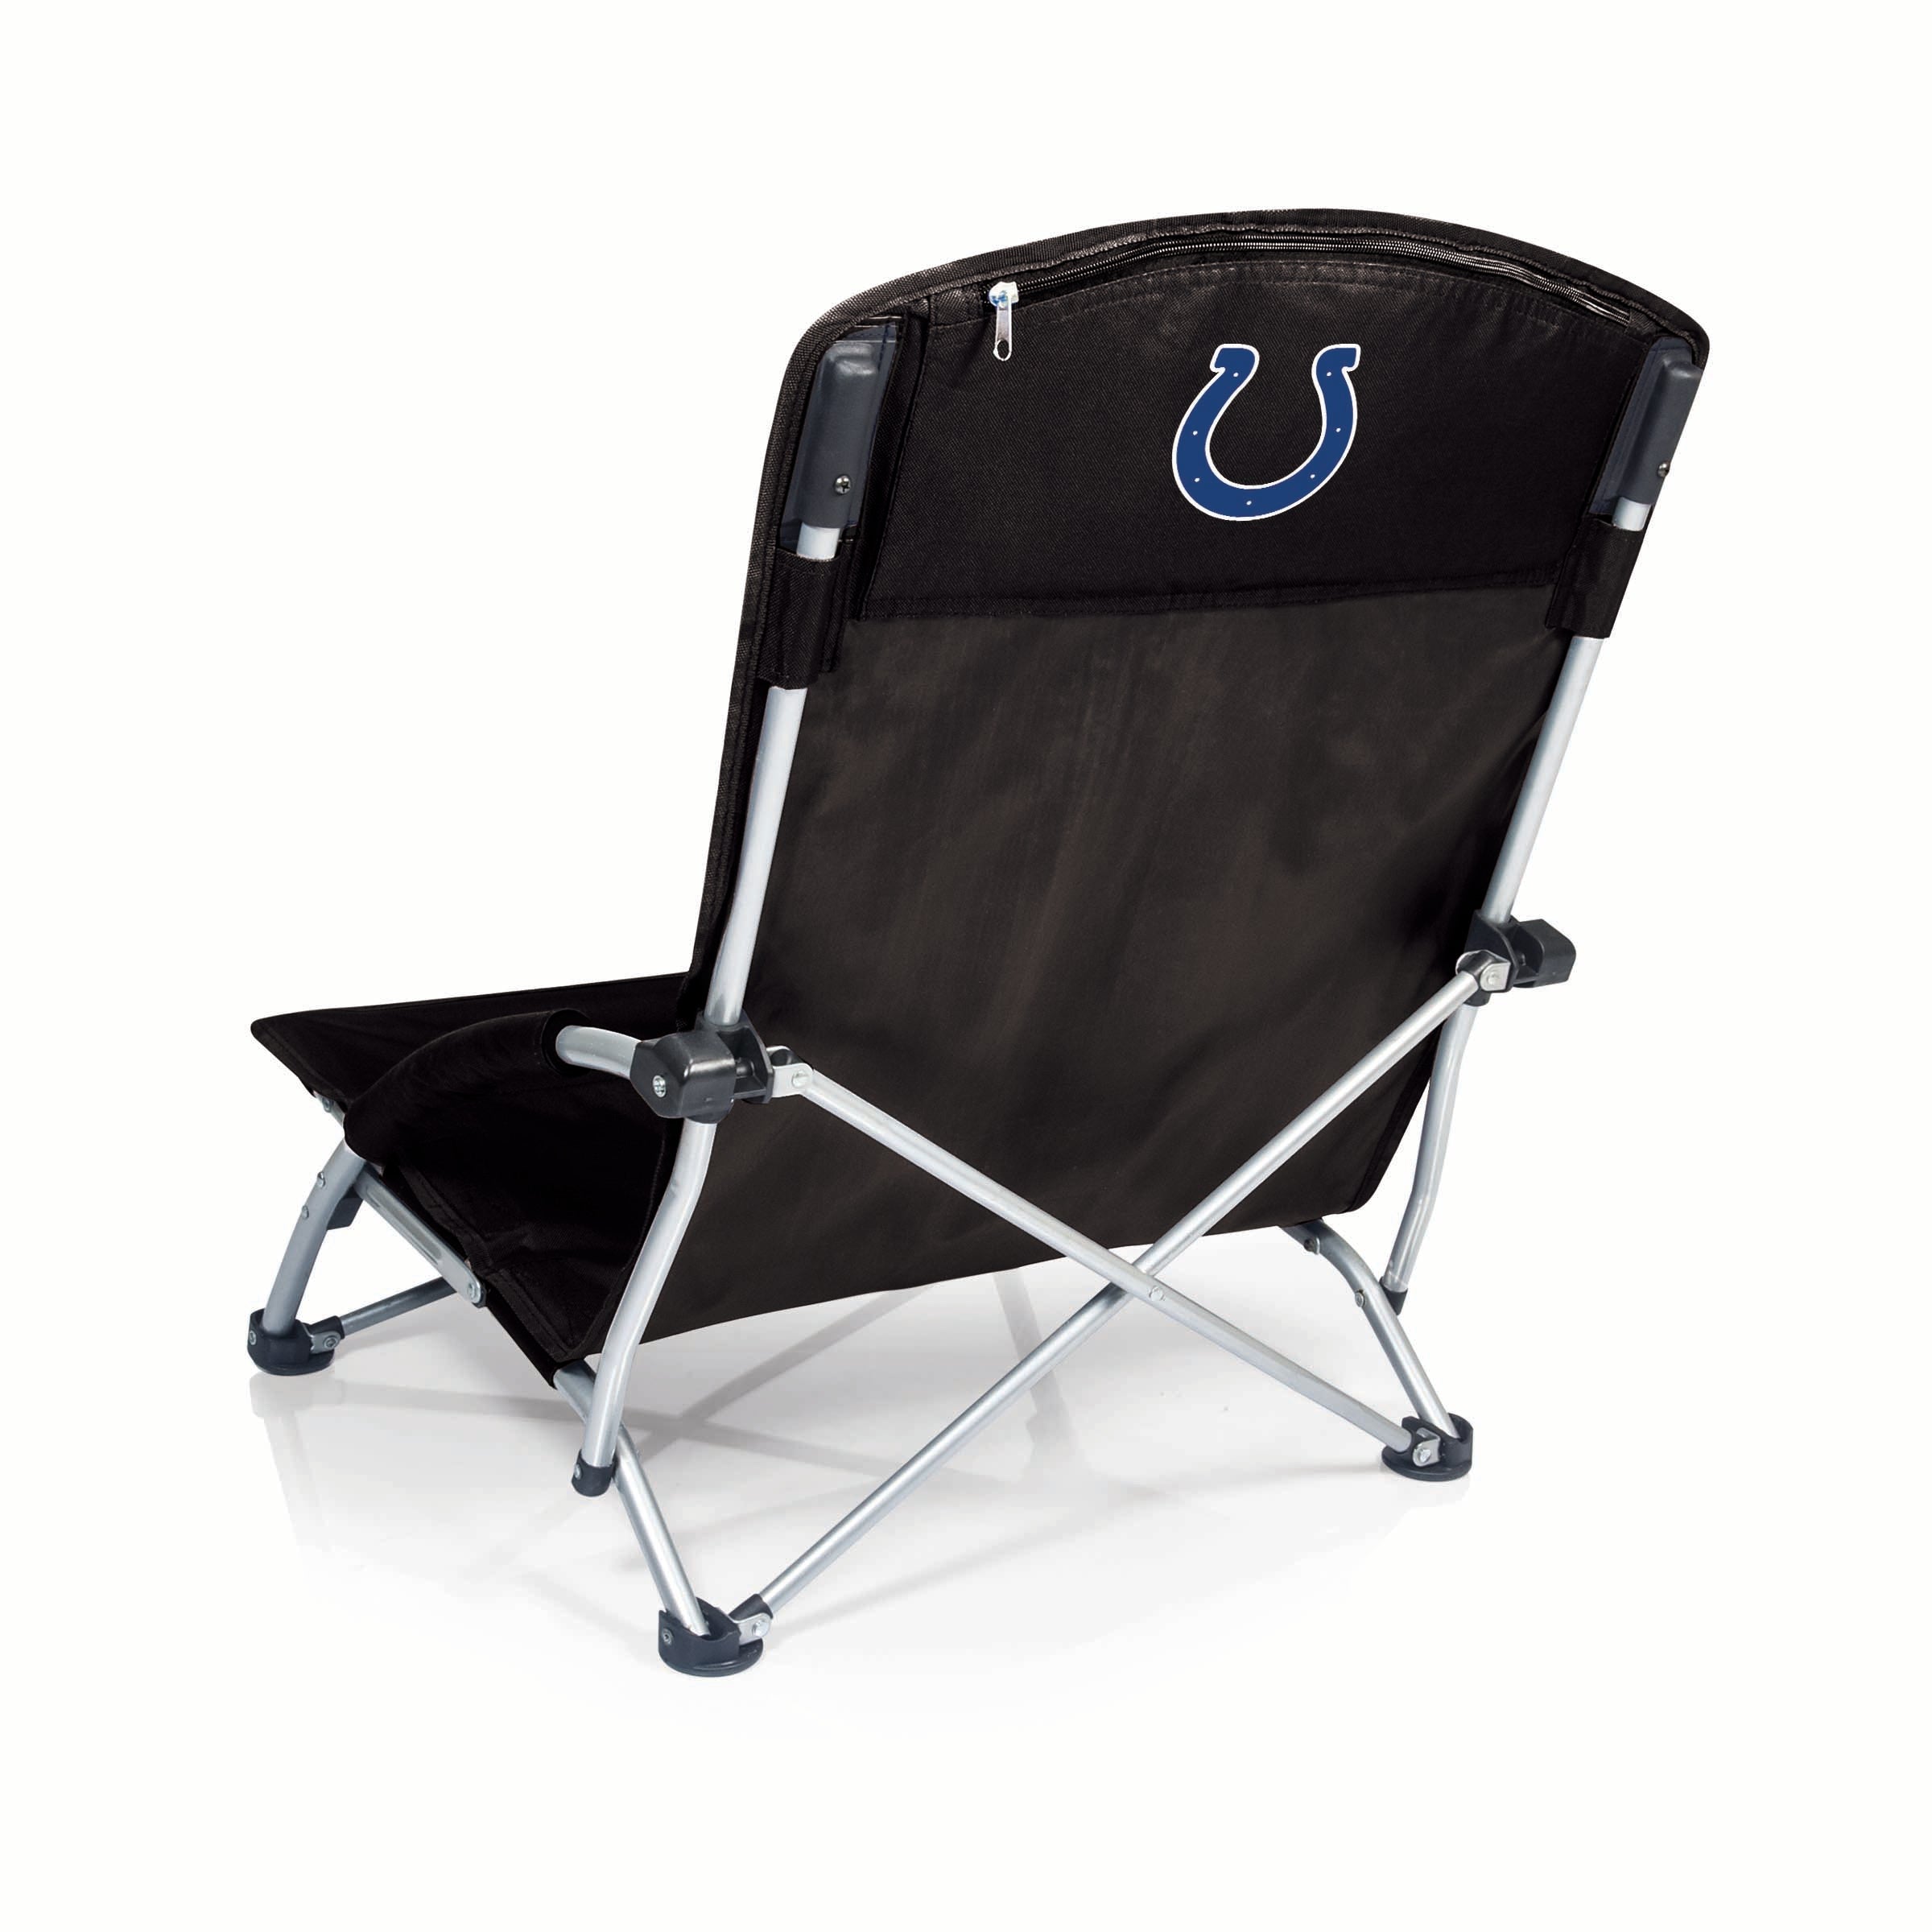 Indianapolis Colts - Tranquility Beach Chair with Carry Bag